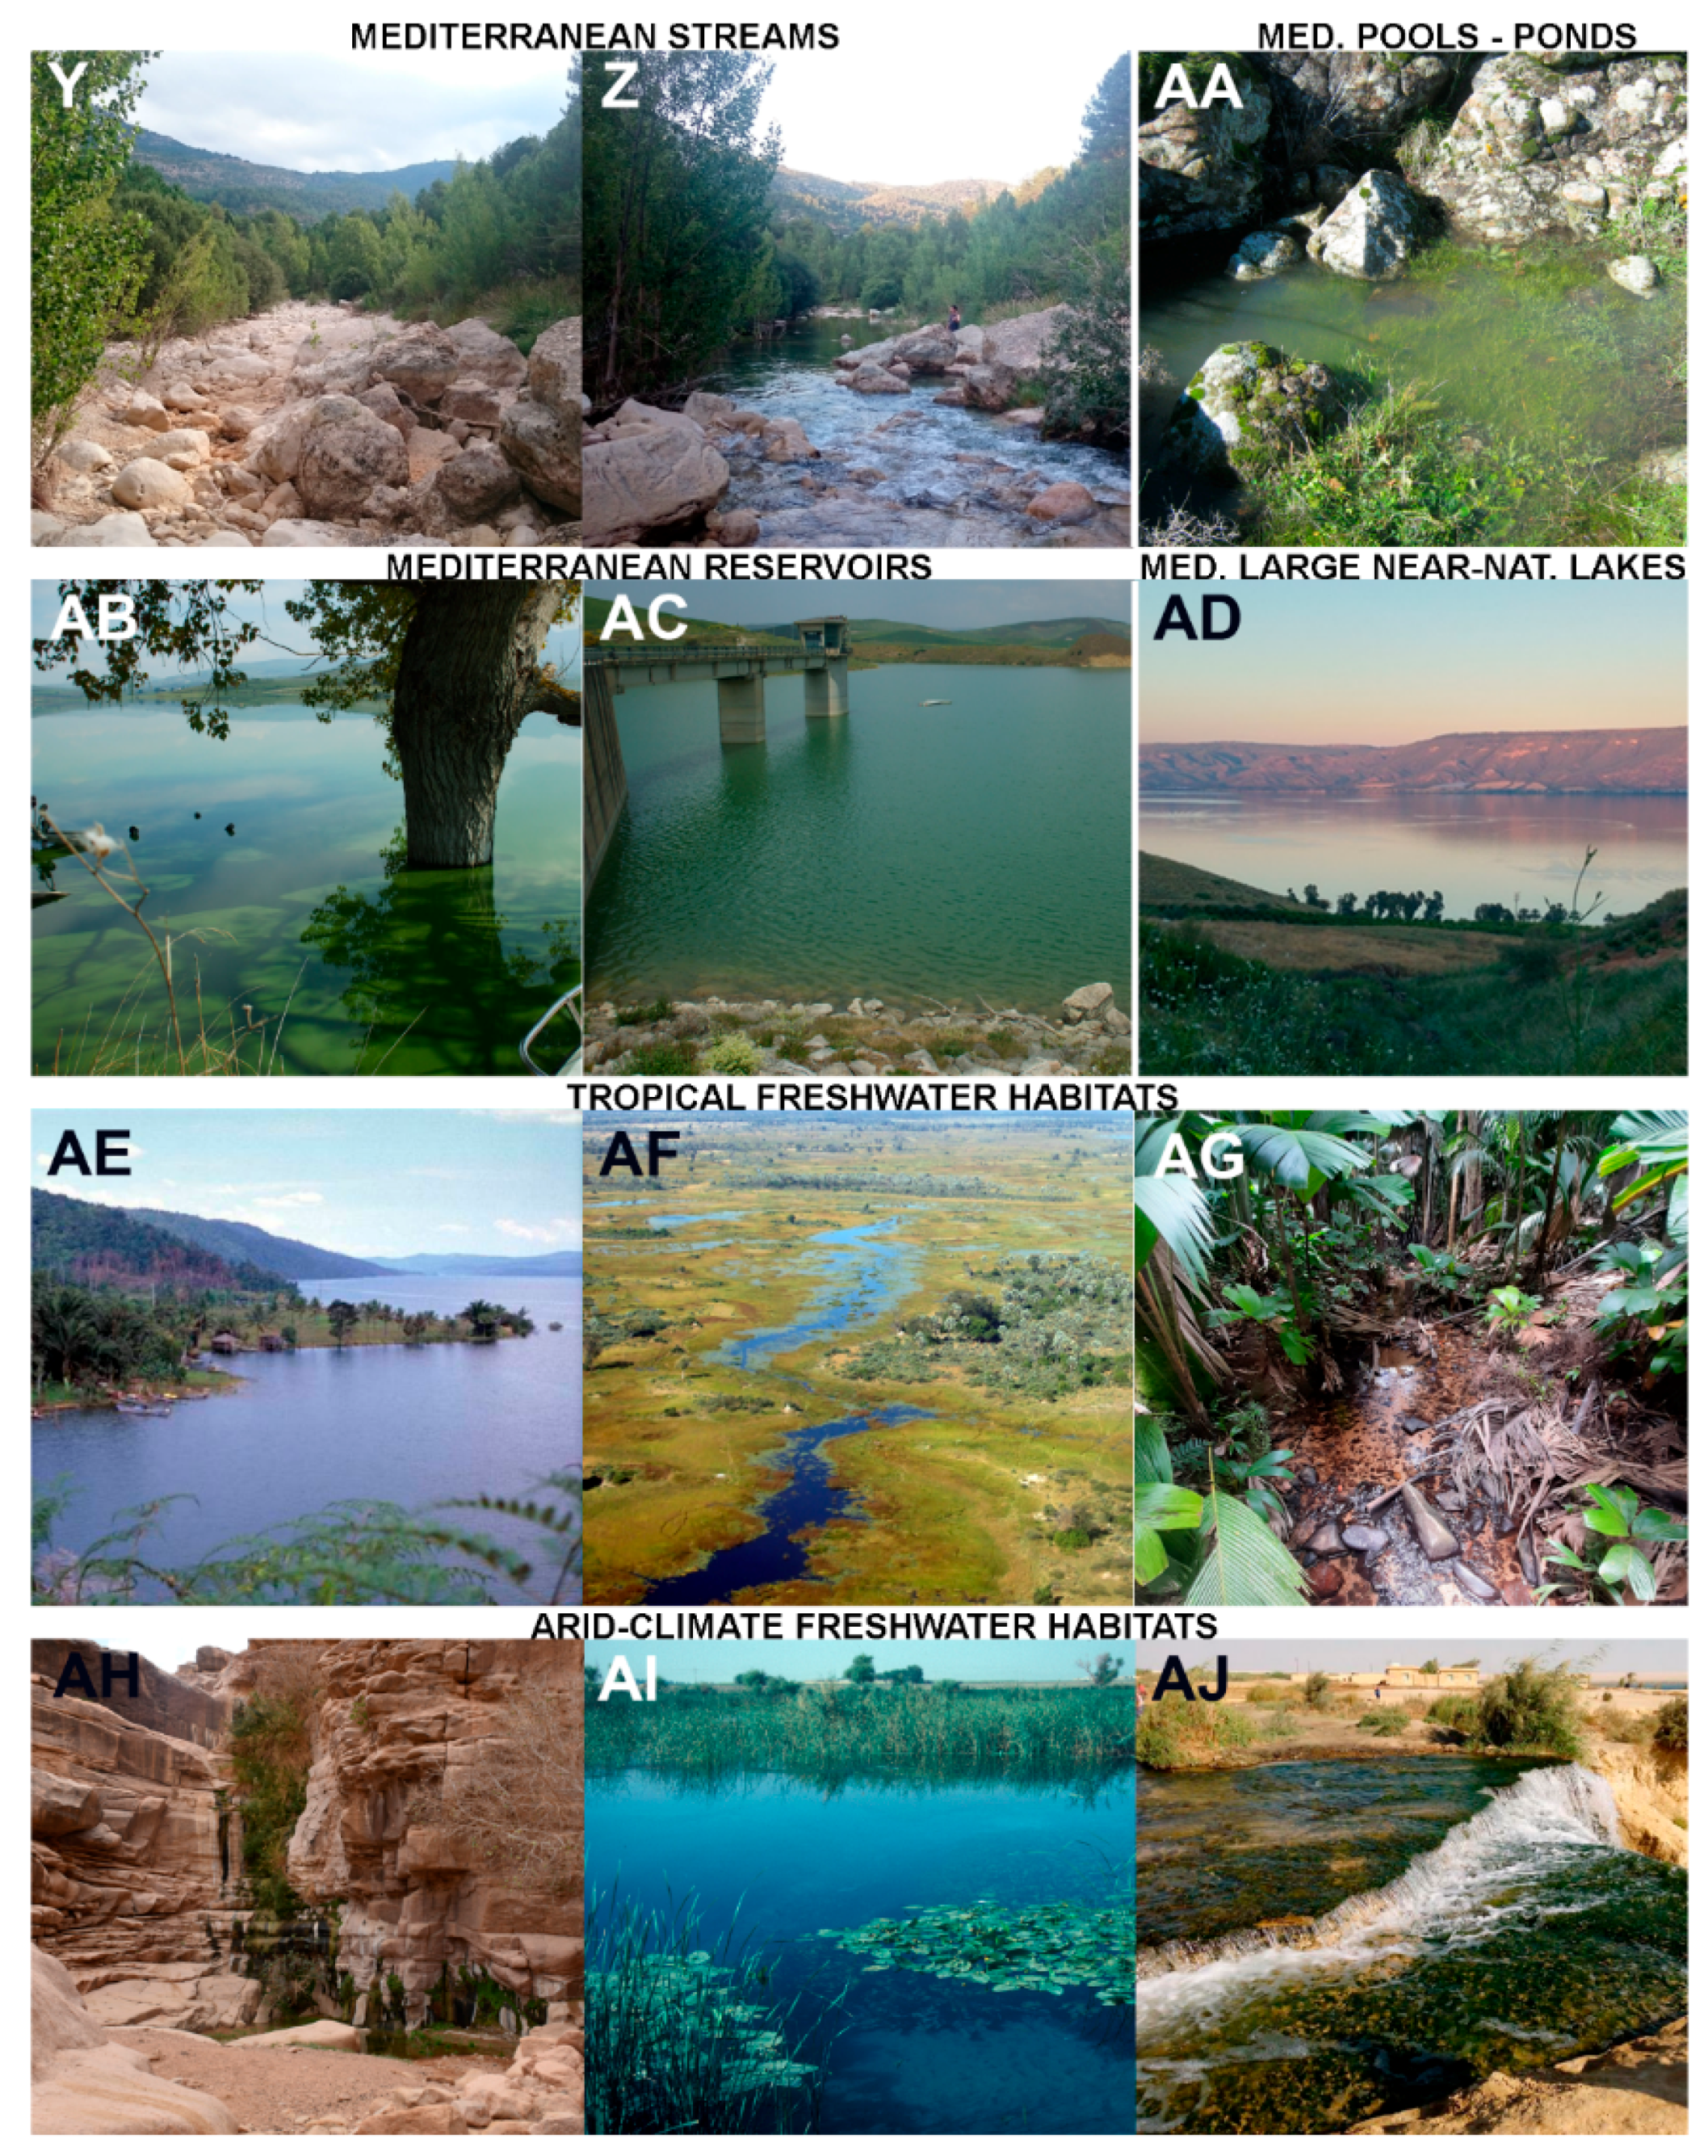 Water | Free Full-Text | Characteristics, Main Impacts, and Stewardship of Natural and Freshwater Environments: Consequences for Biodiversity Conservation | HTML